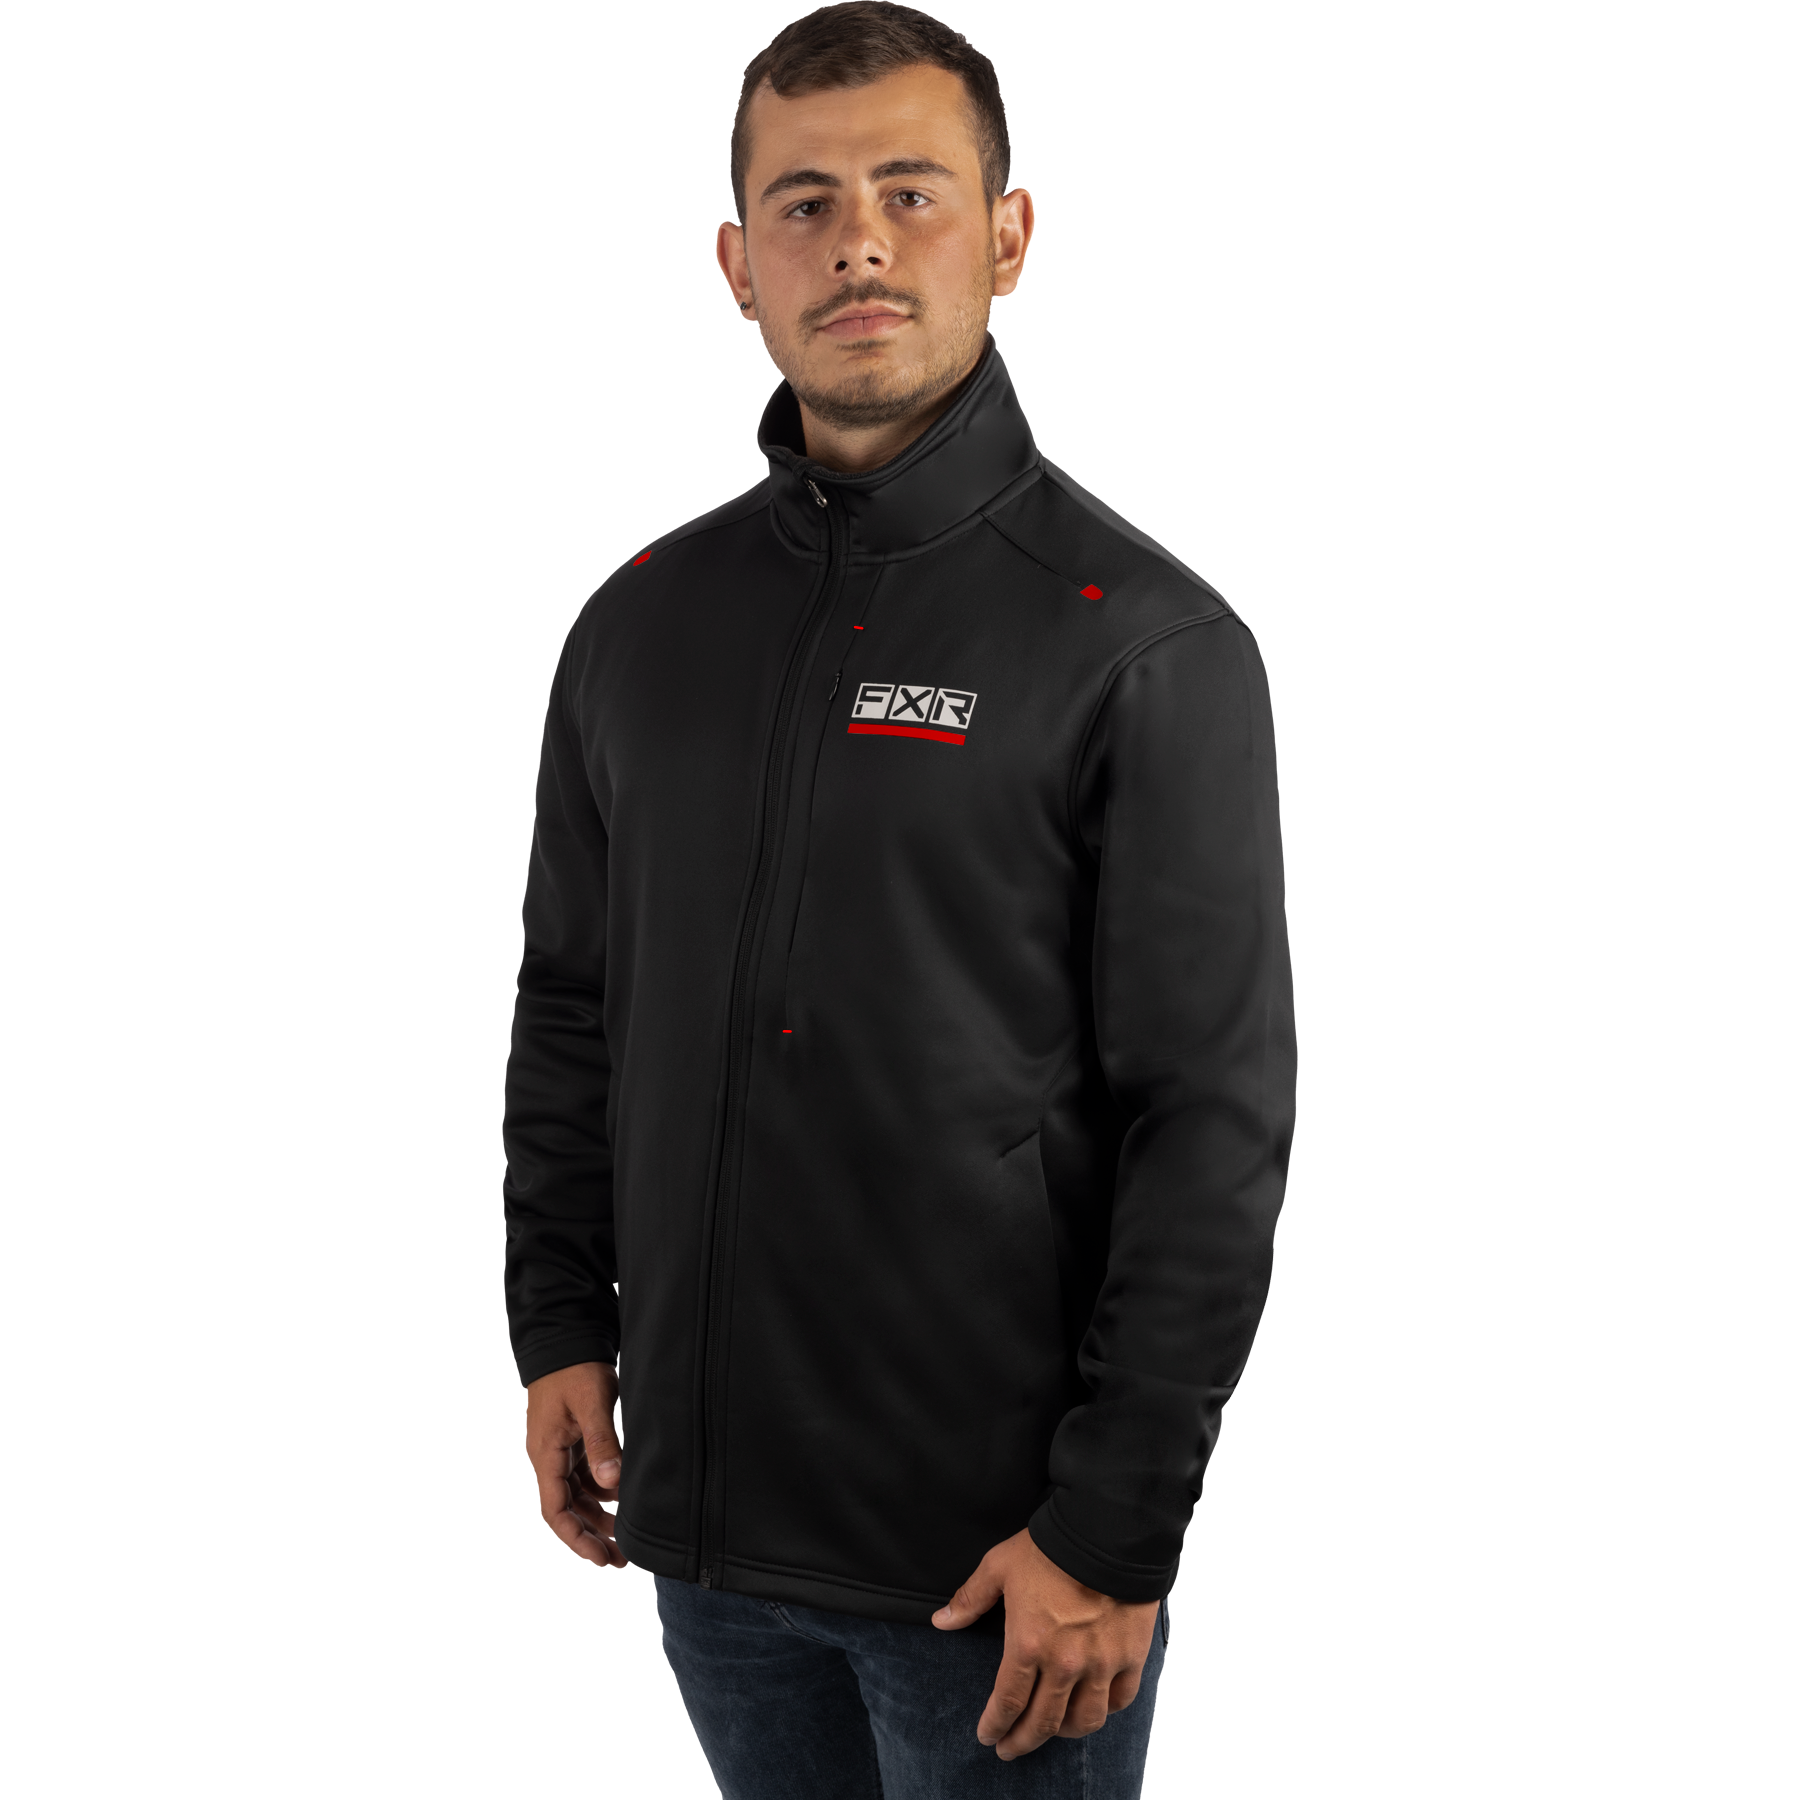 fxr racing jackets  elevation tech zip up  jackets - casual